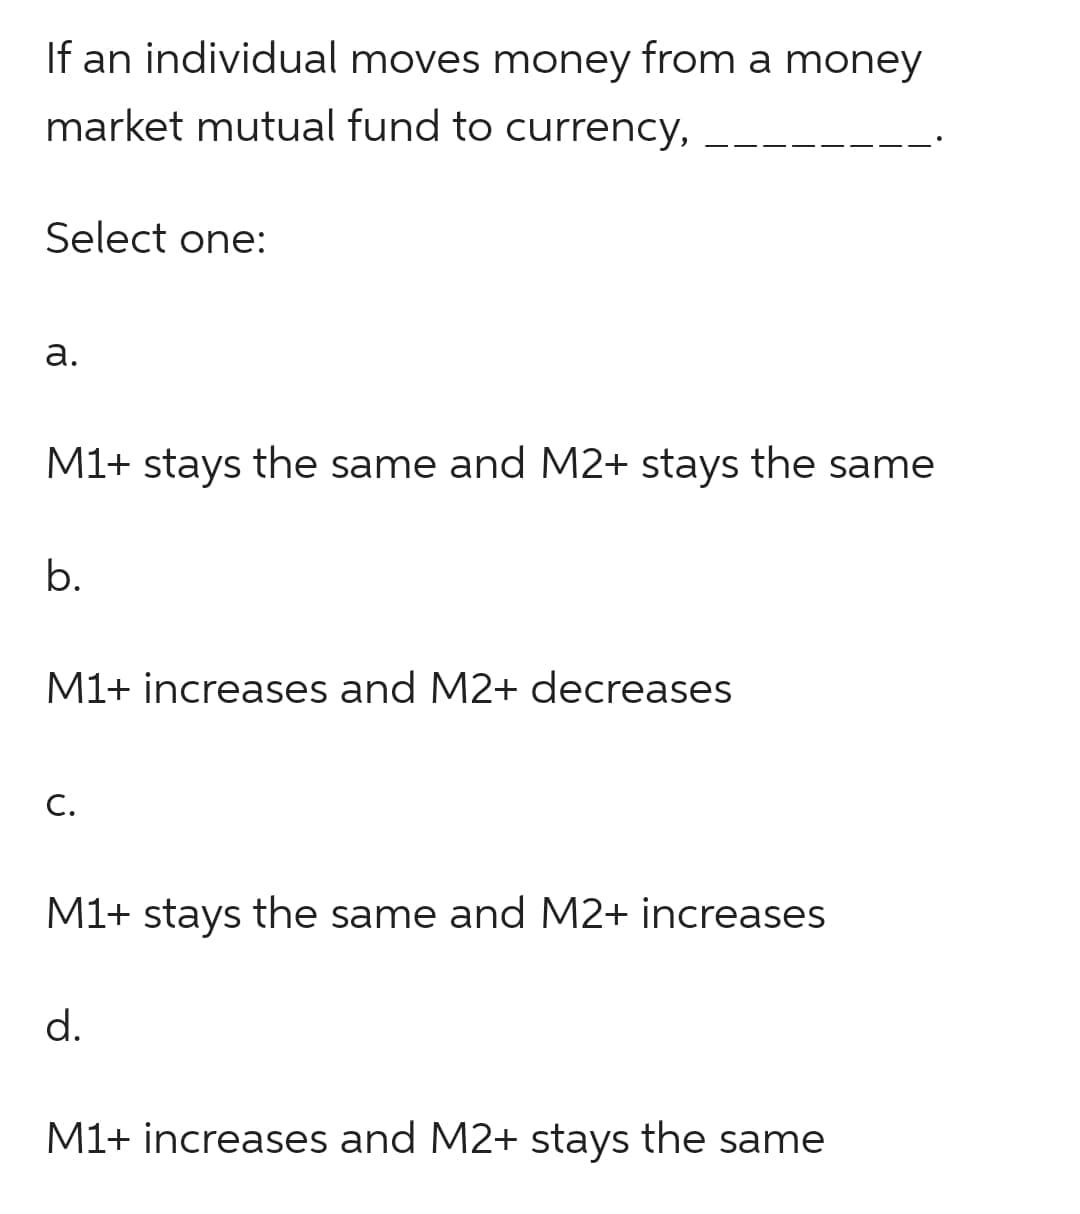 If an individual moves money from a money
market mutual fund to currency,
Select one:
a.
M1+ stays the same and M2+ stays the same
b.
M1+ increases and M2+ decreases
C.
M1+ stays the same and M2+ increases
d.
M1+ increases and M2+ stays the same